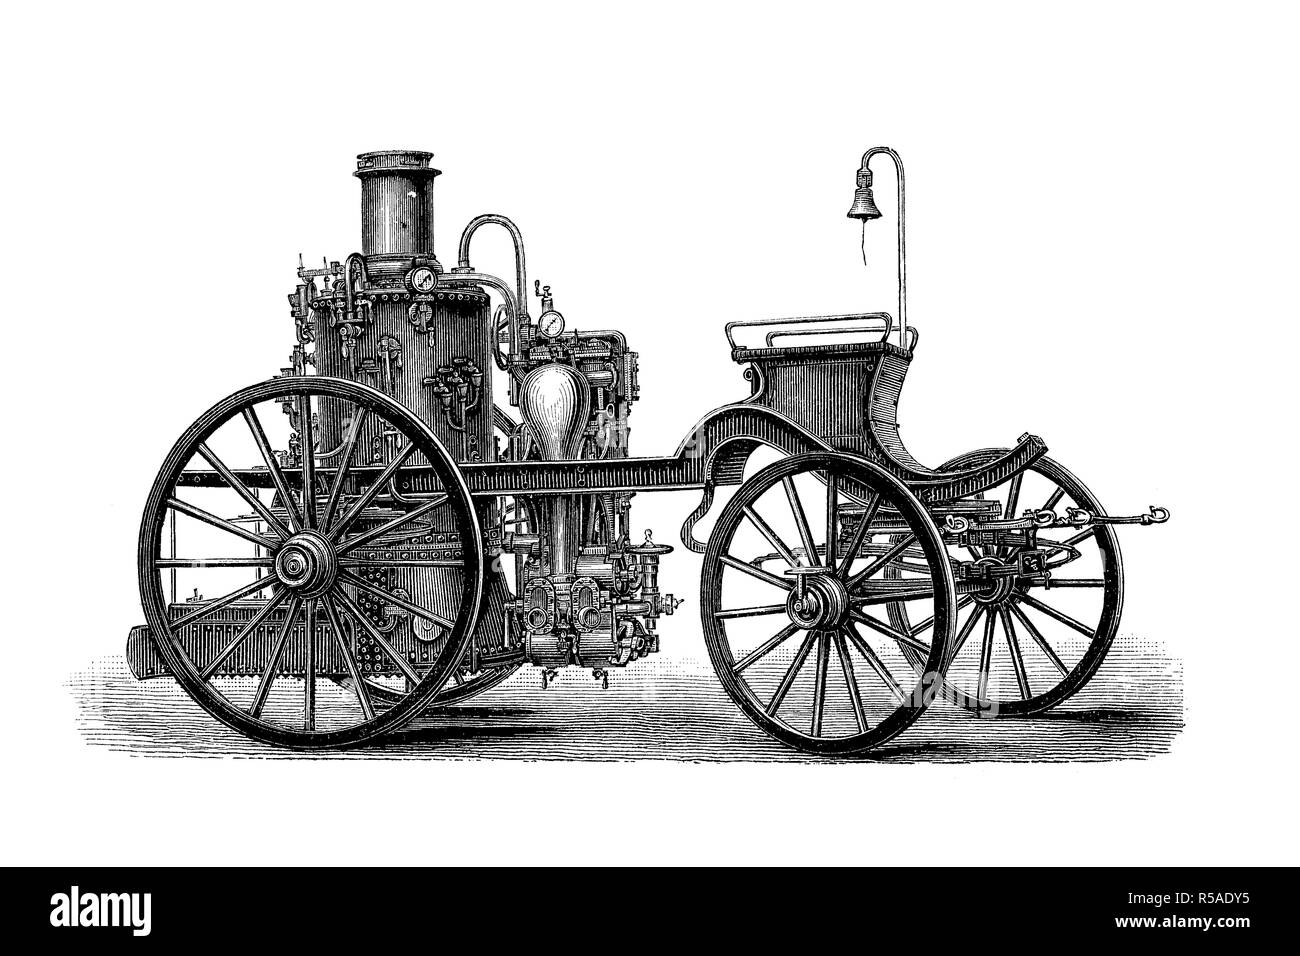 History of steam powered vehicles фото 13